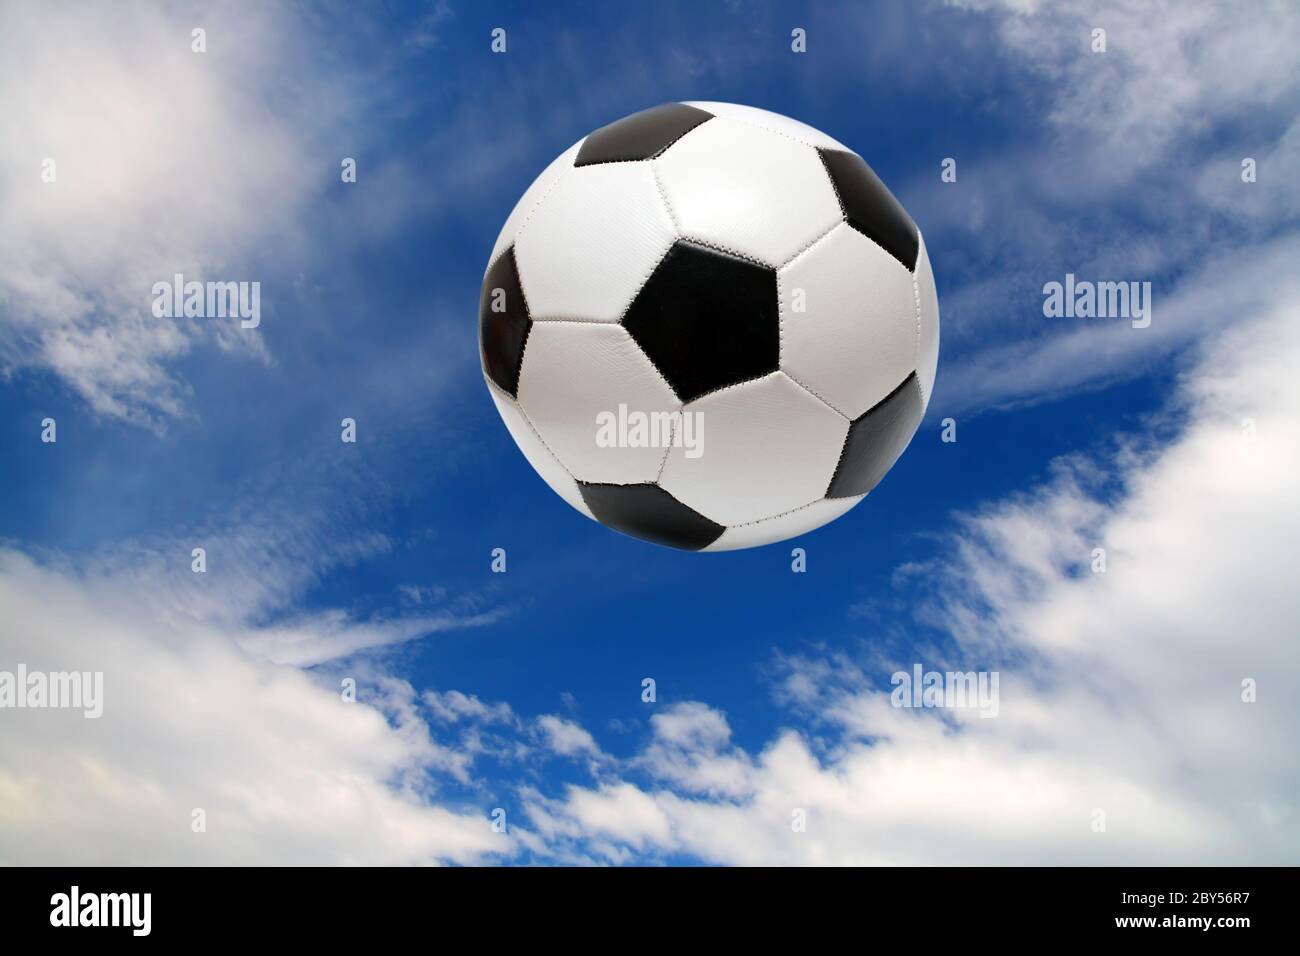 Horizontal image of soccer ball being kicked by footballer against blue sky  Royalty-Free Stock Image - Storyblocks